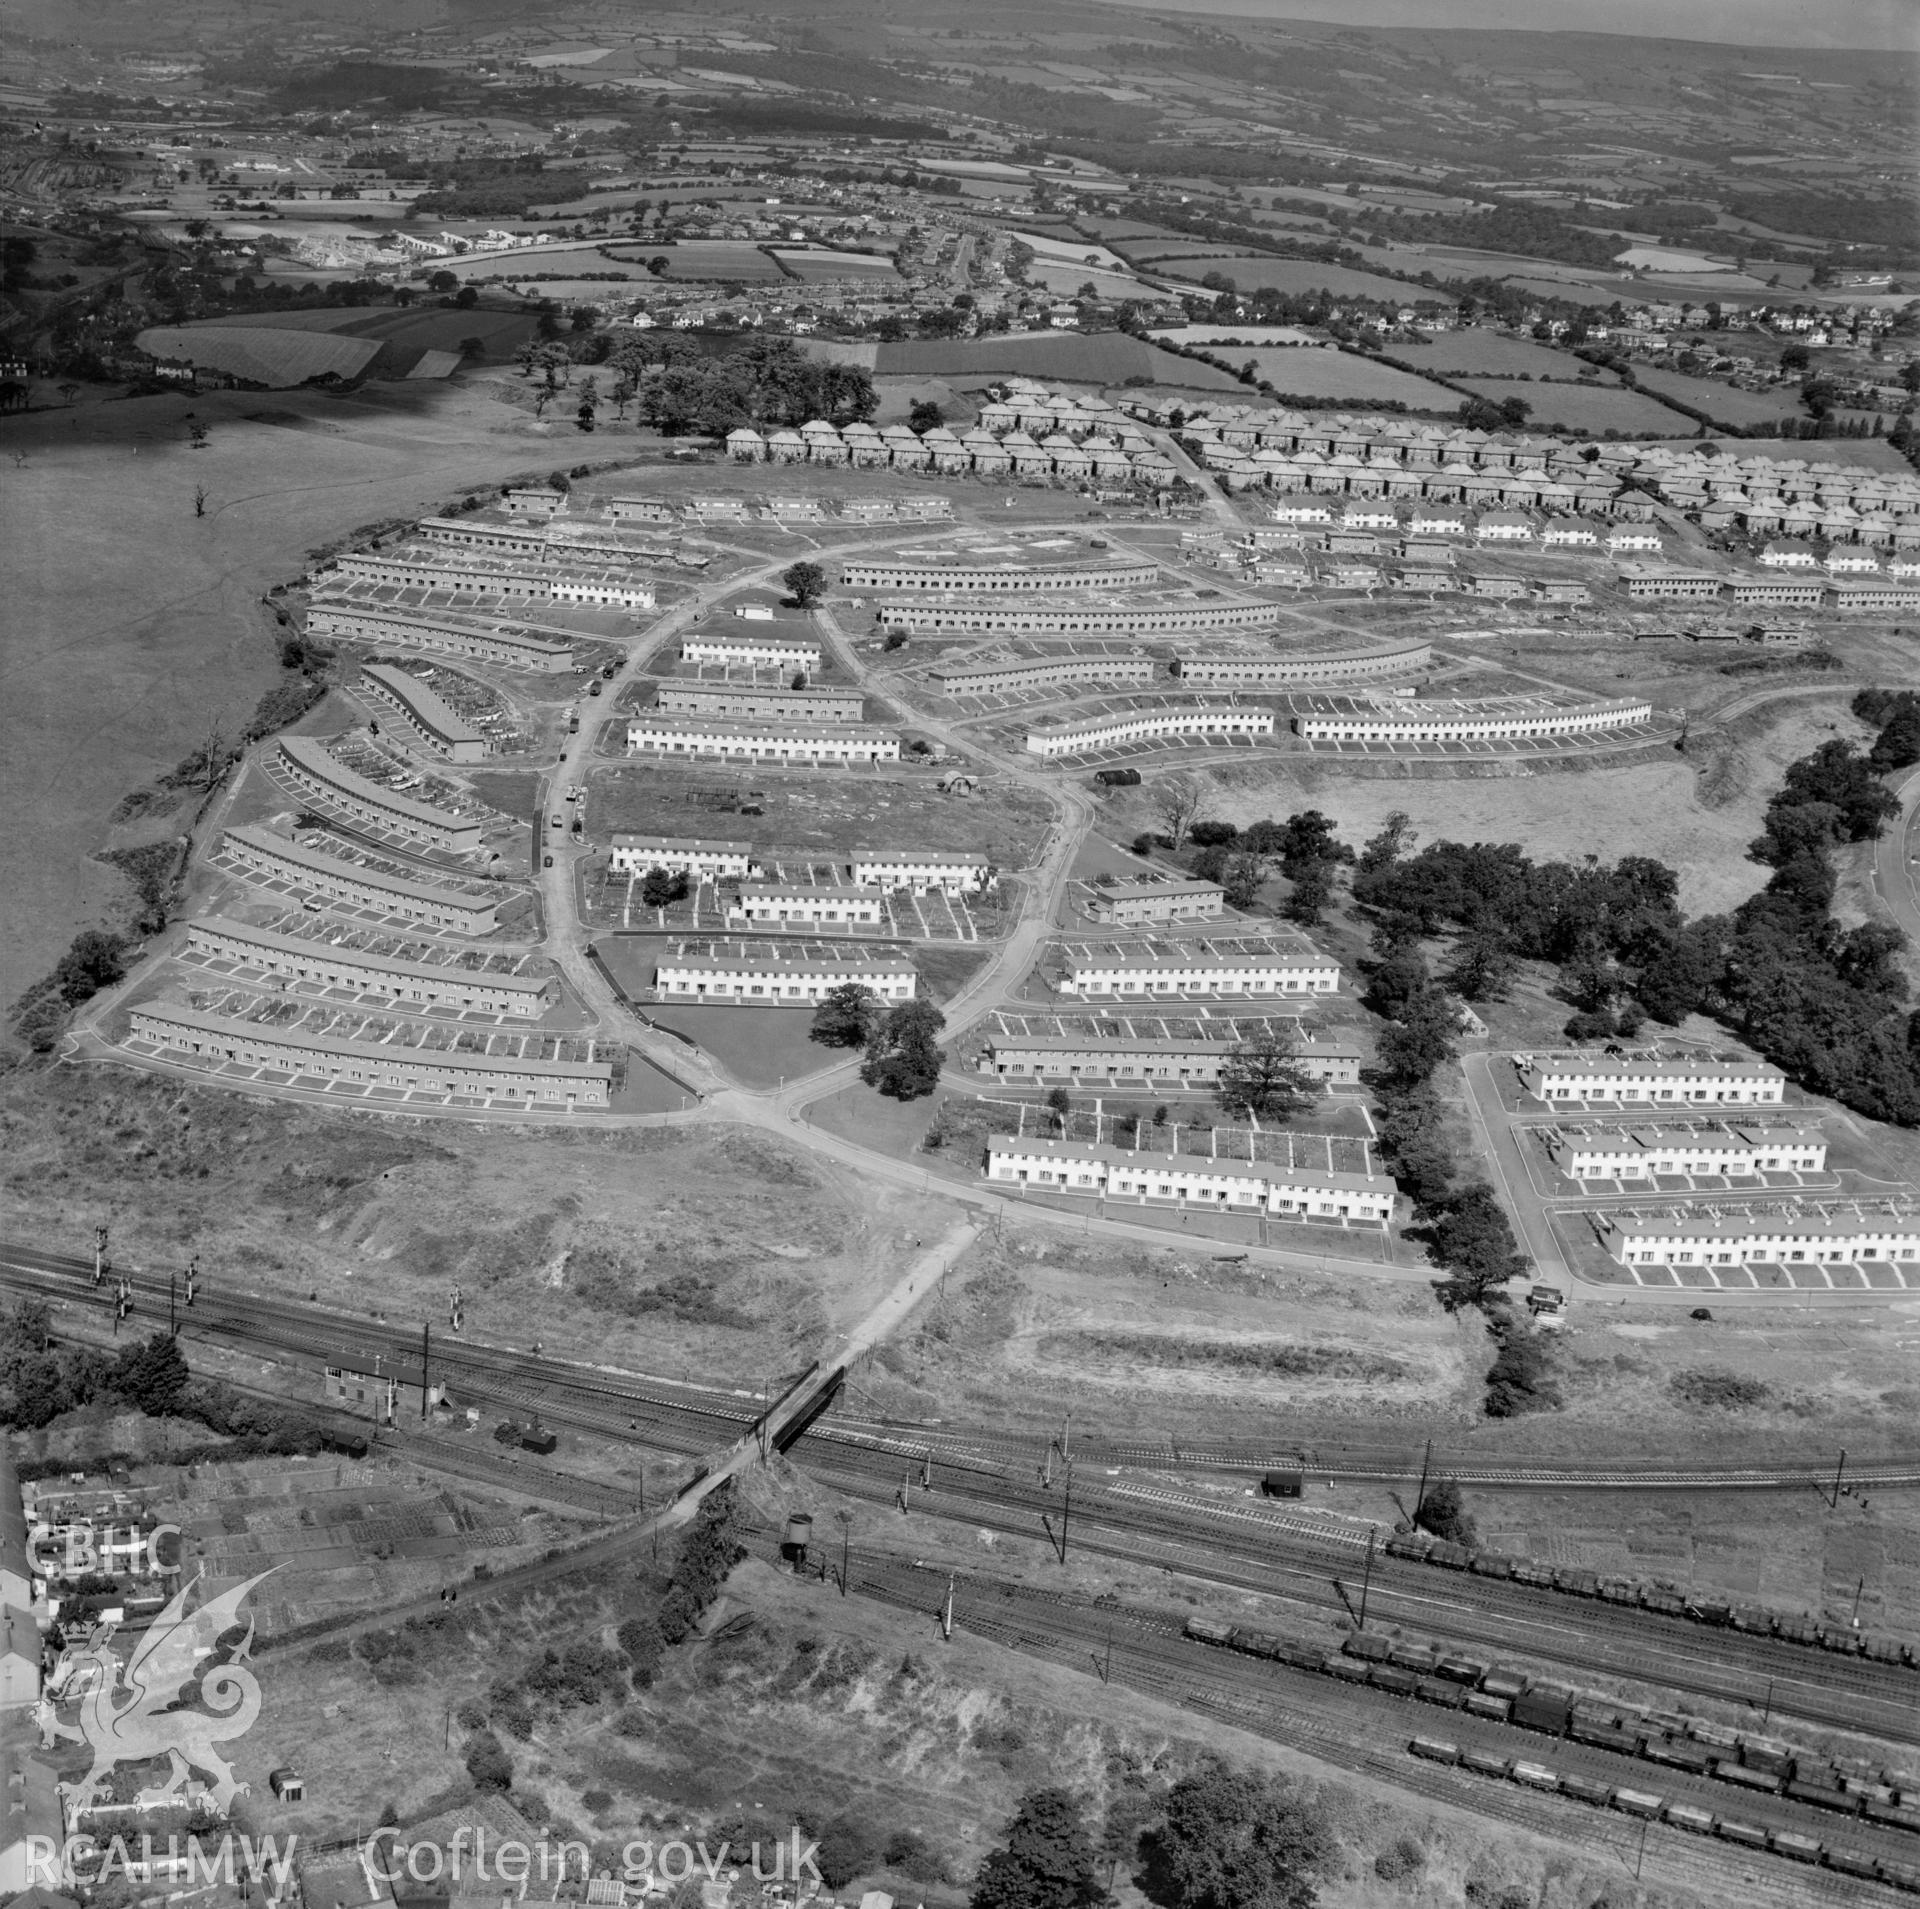 View of Gaer housing estate showing newly built houses in 1950